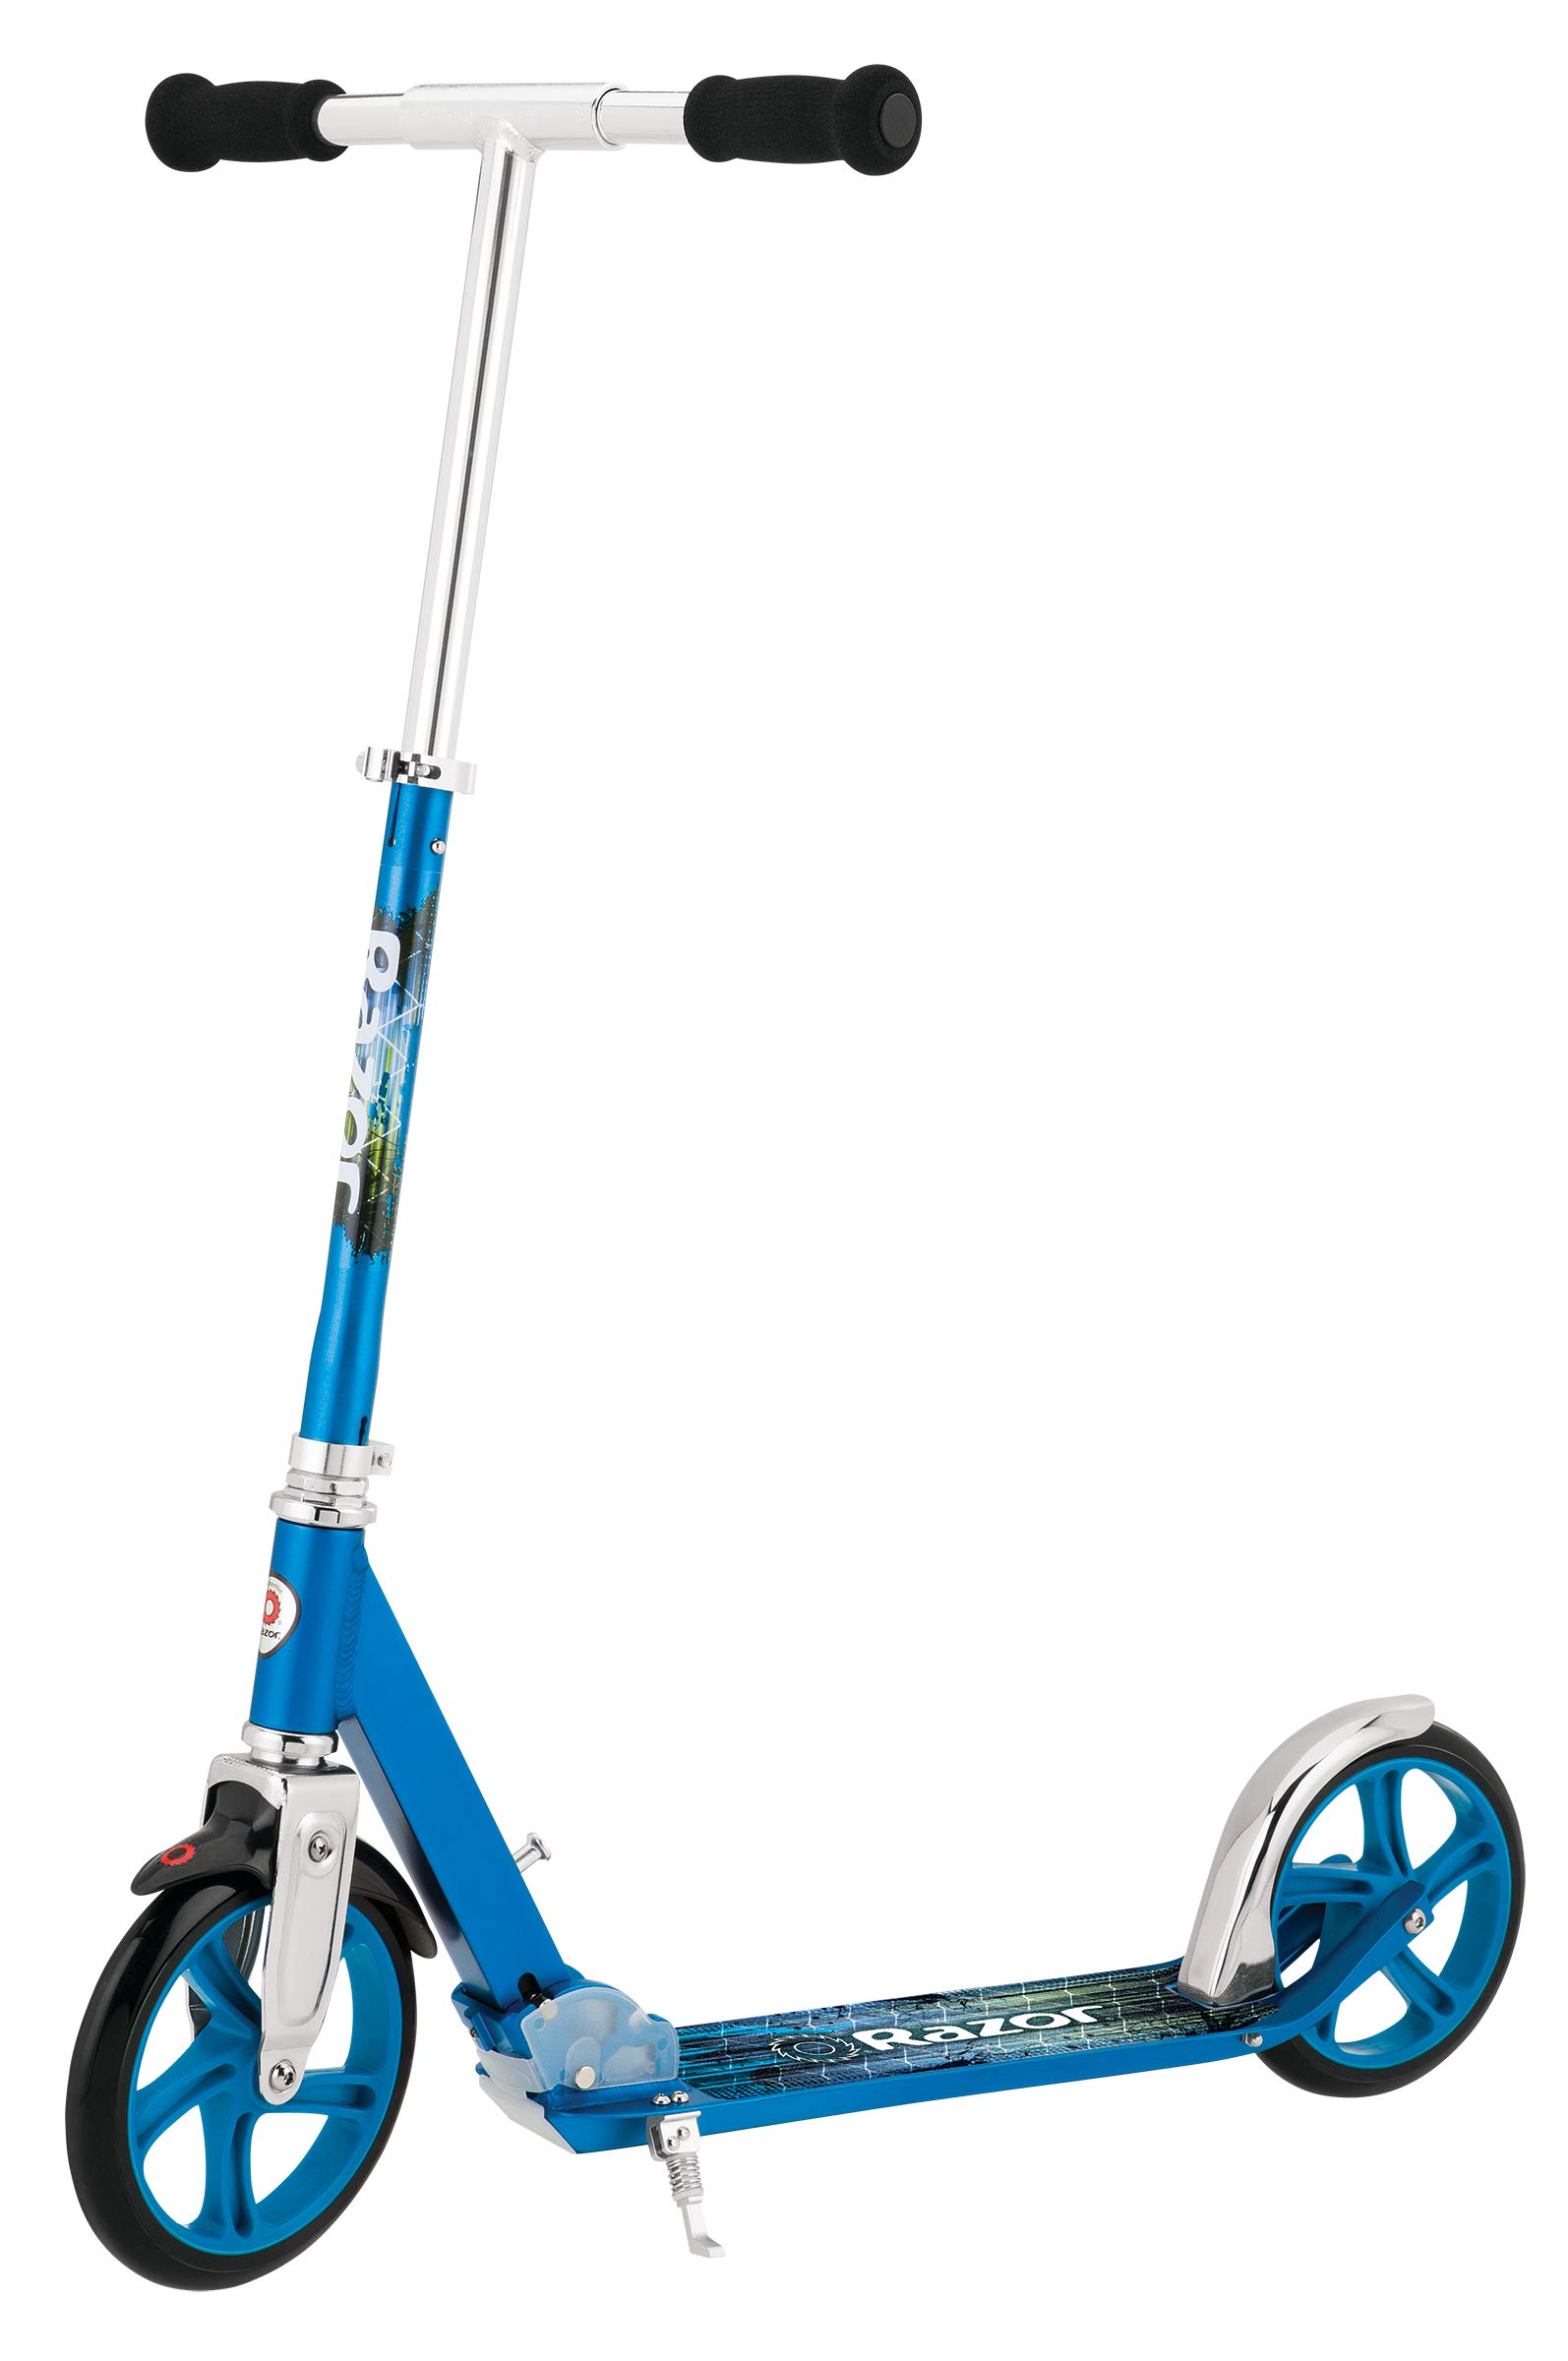 RAZOR A5 Lux Kick Scooter - Large 8" Wheels, Foldable, Adjustable Handlebars, Lightweight, for Riders up to 220 lbs